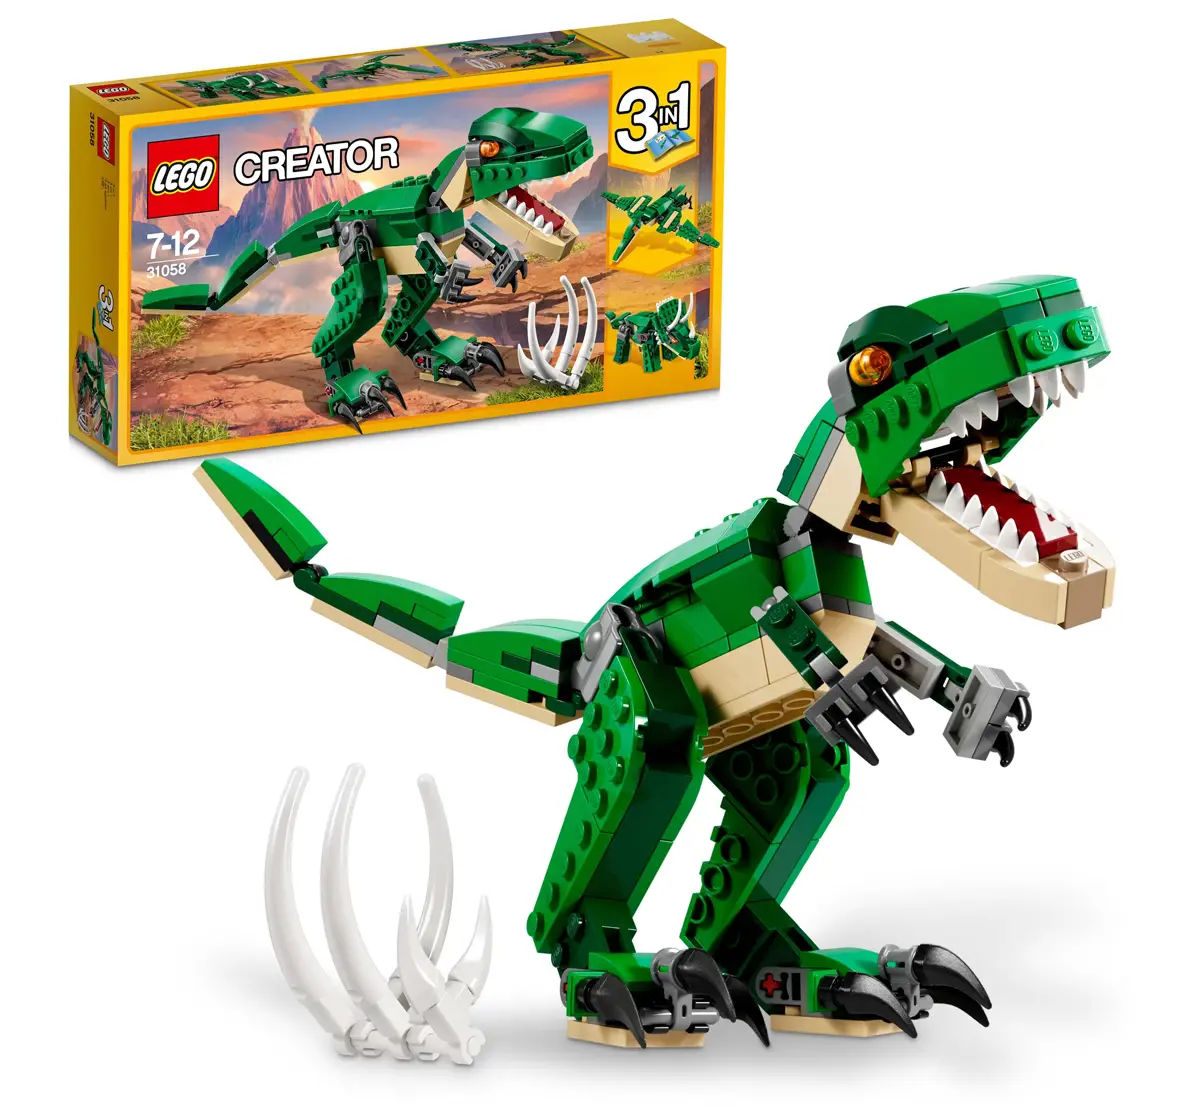 LEGO Creator 3in1 Mighty Dinosaurs Building Blocks for Kids 31058 (174 Pieces)